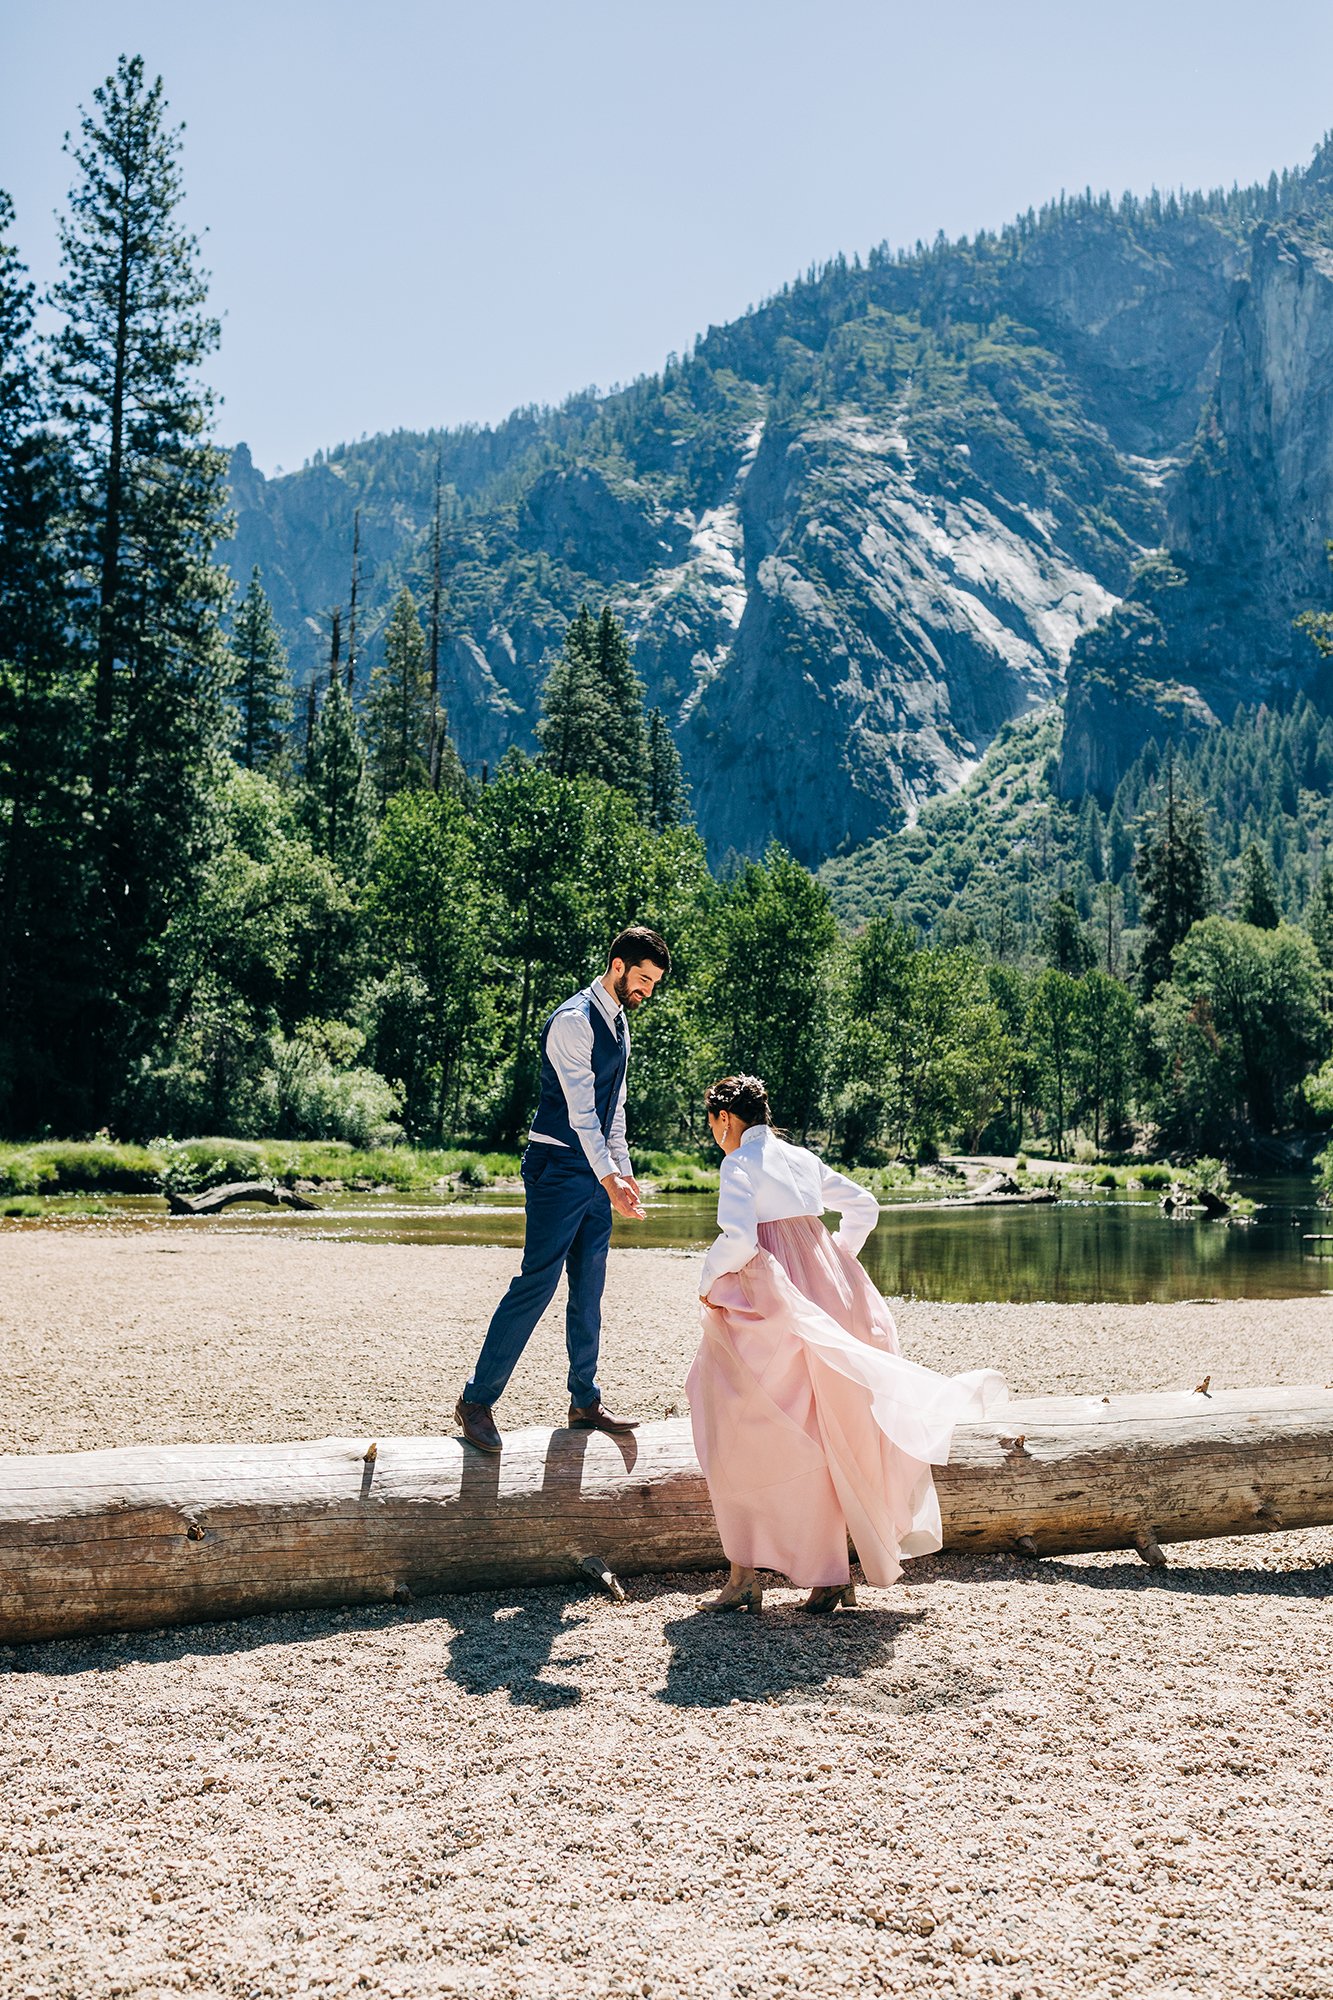 Yooree and Jarrod climb onto a log during their elopement in Yosemite National Park, California.